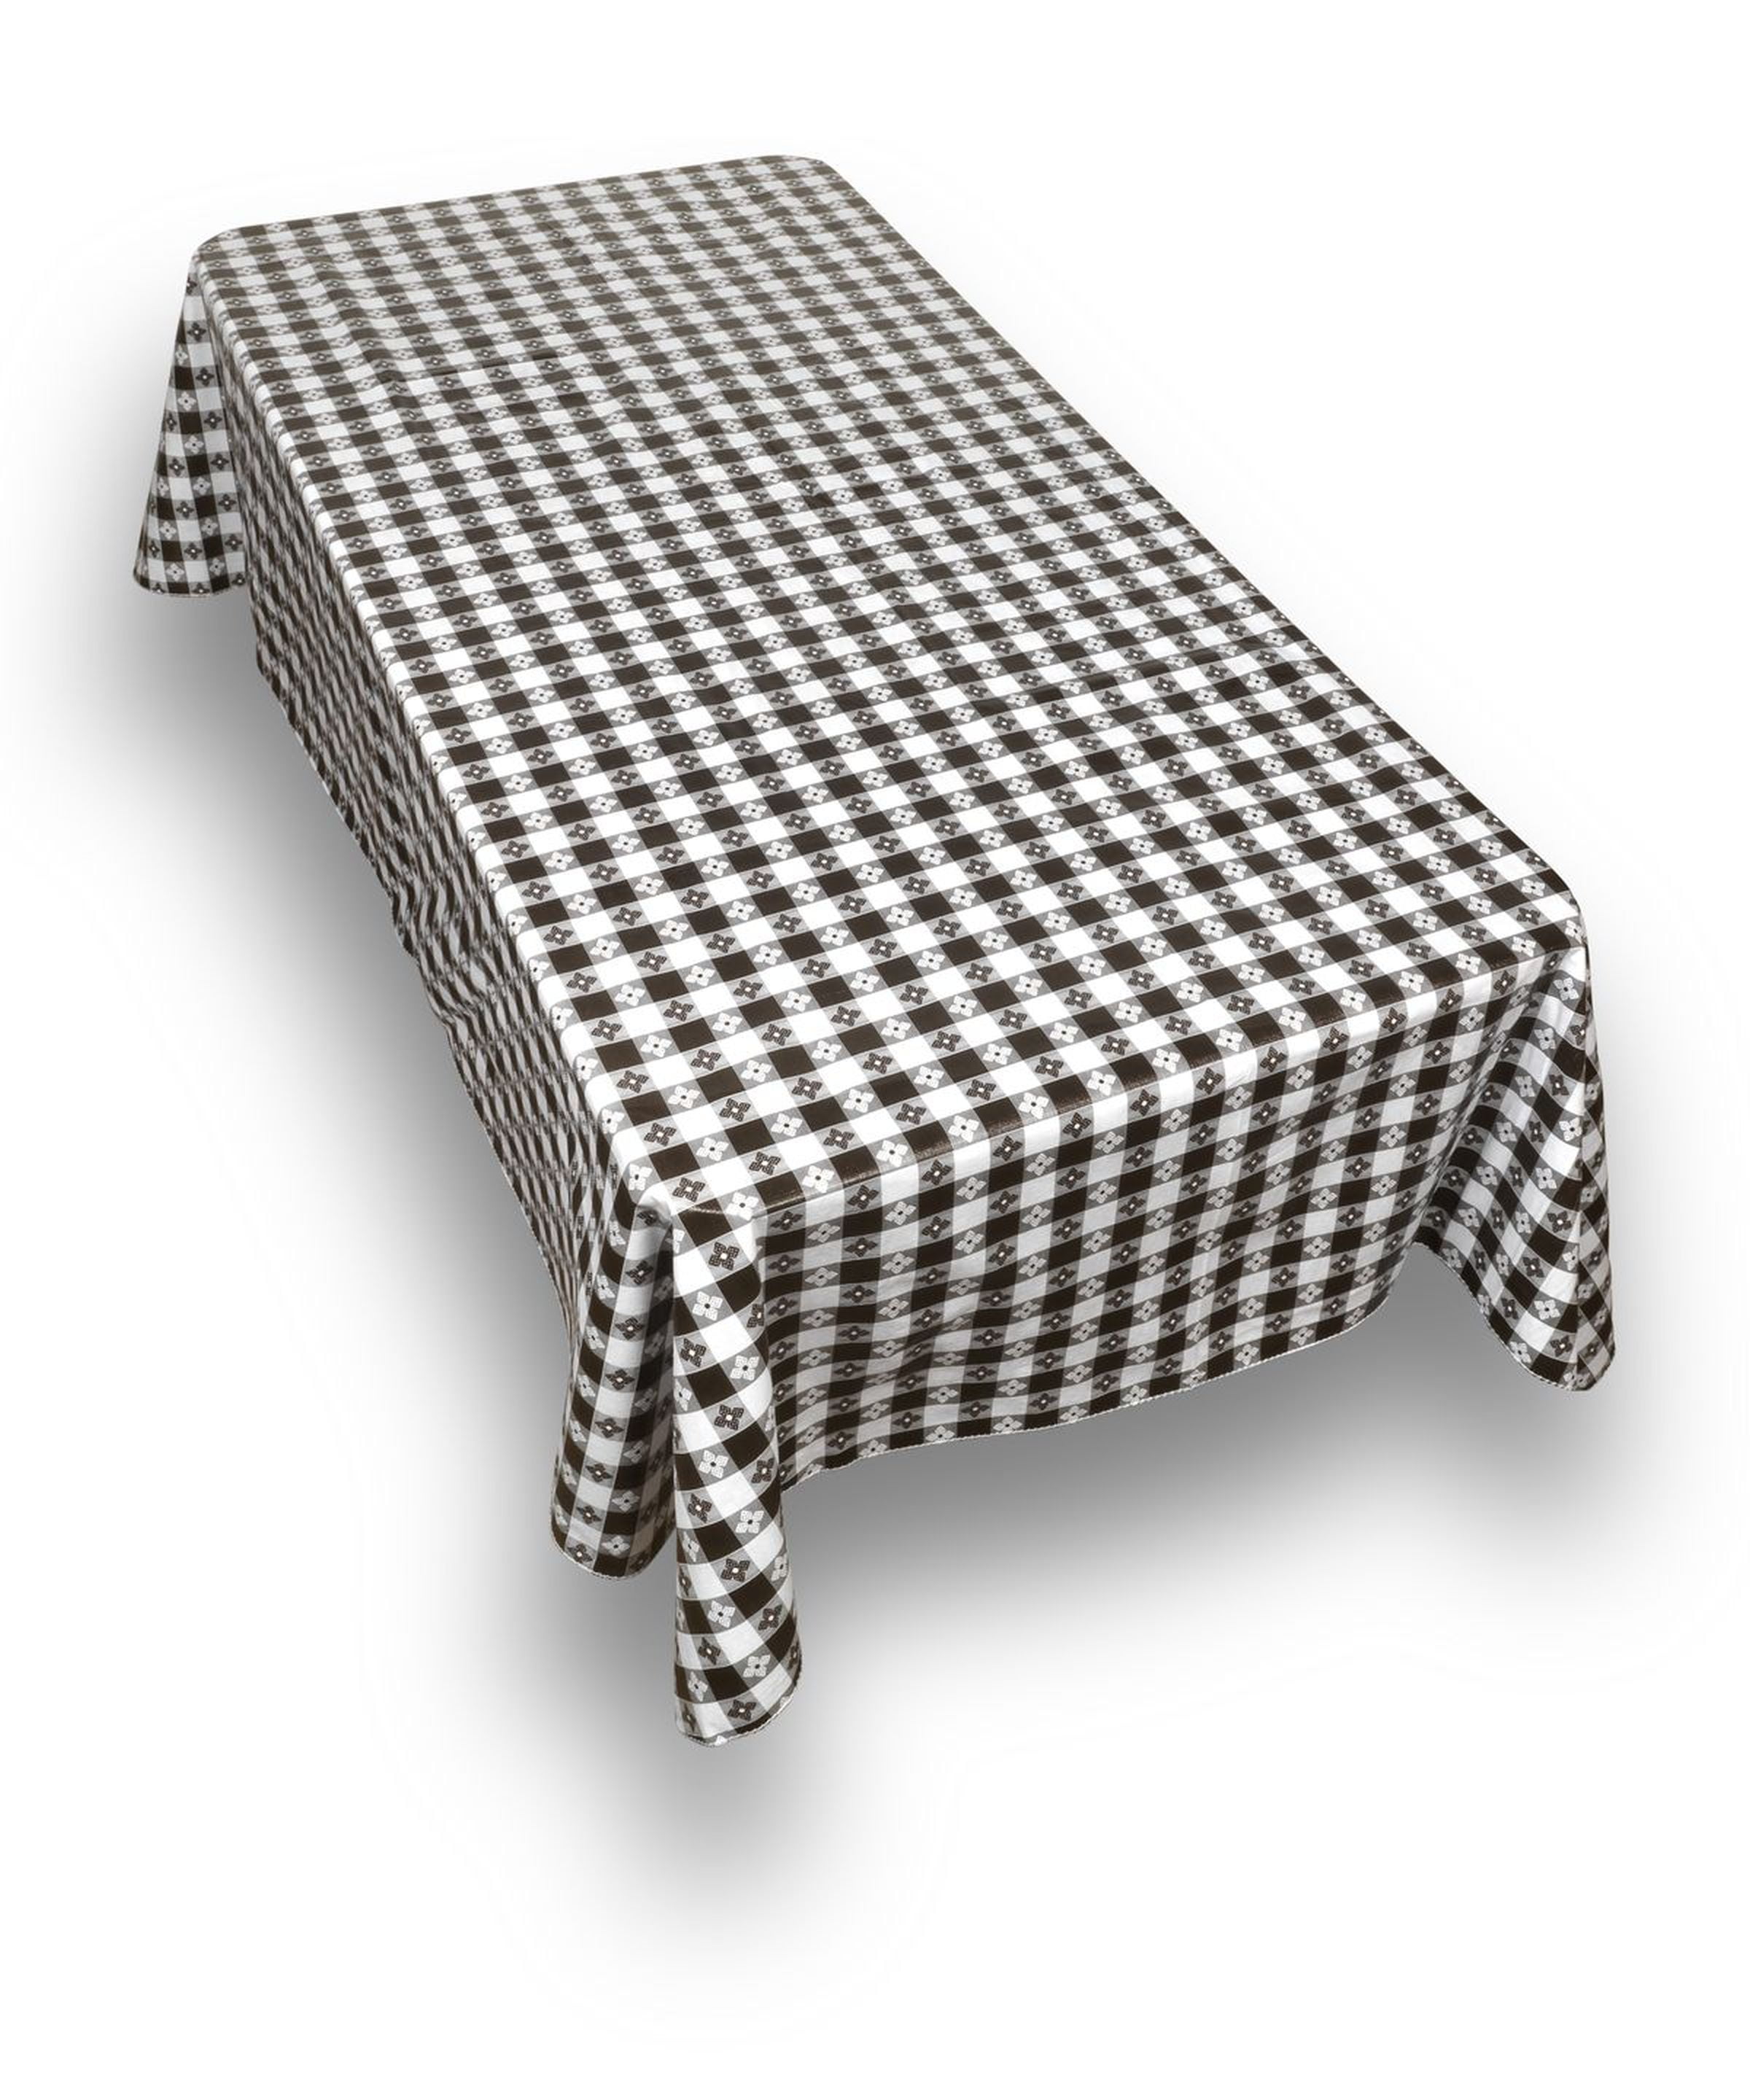 Houndstooth Glen Check Plaid Rectangle Tablecloth Picnic Tablecloth BBQ Table Cloths Polyester for Kitchen 54x72 Inch